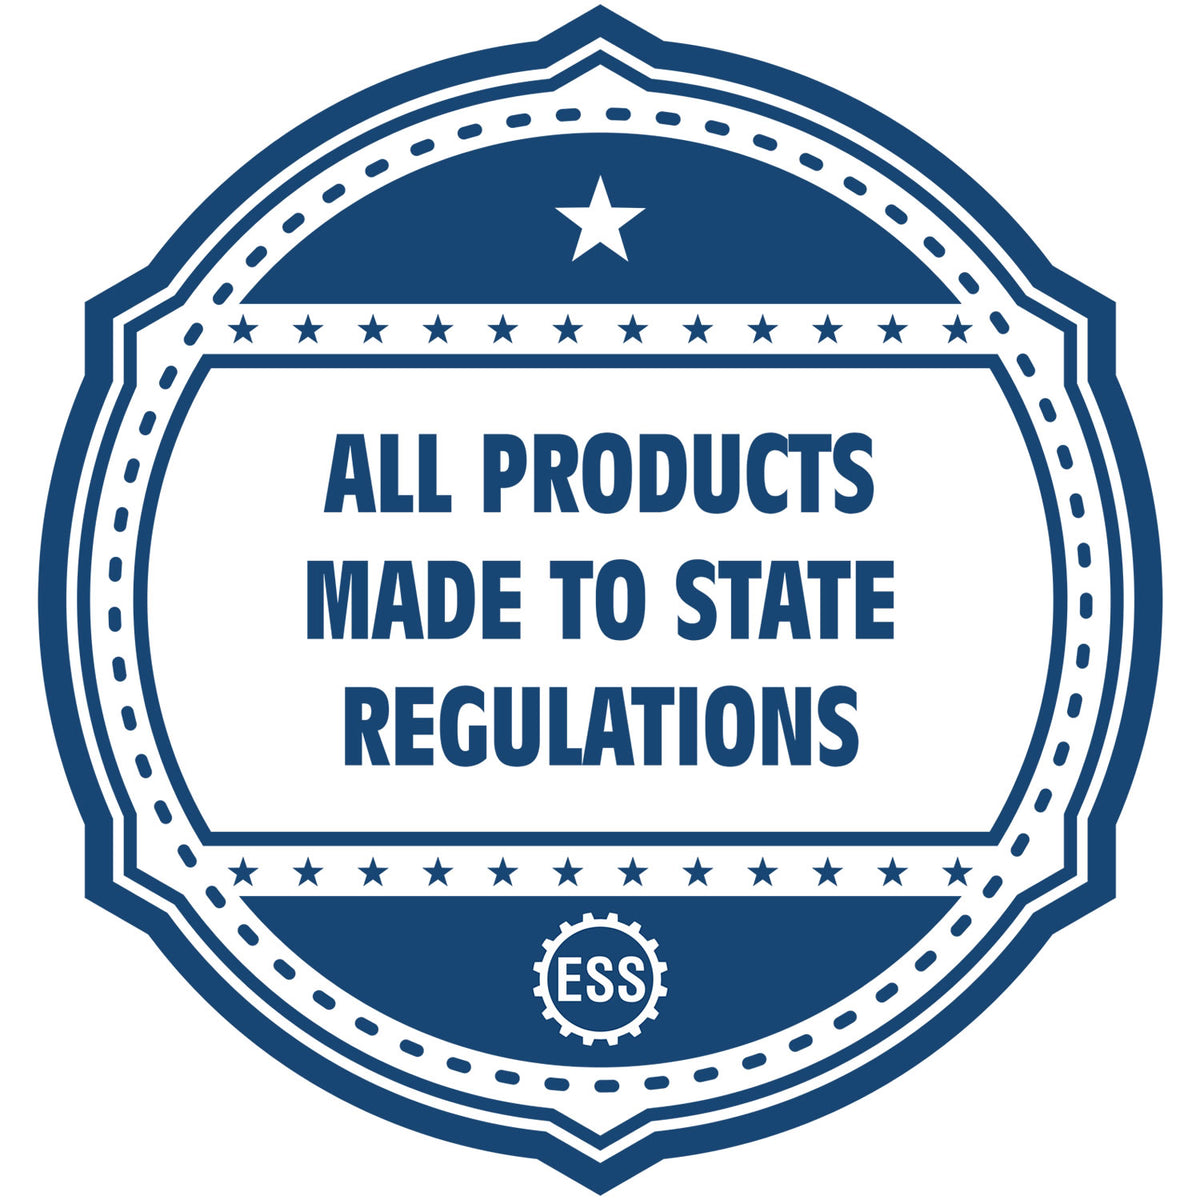 An icon or badge element for the Slim Pre-Inked Indiana Professional Engineer Seal Stamp showing that this product is made in compliance with state regulations.